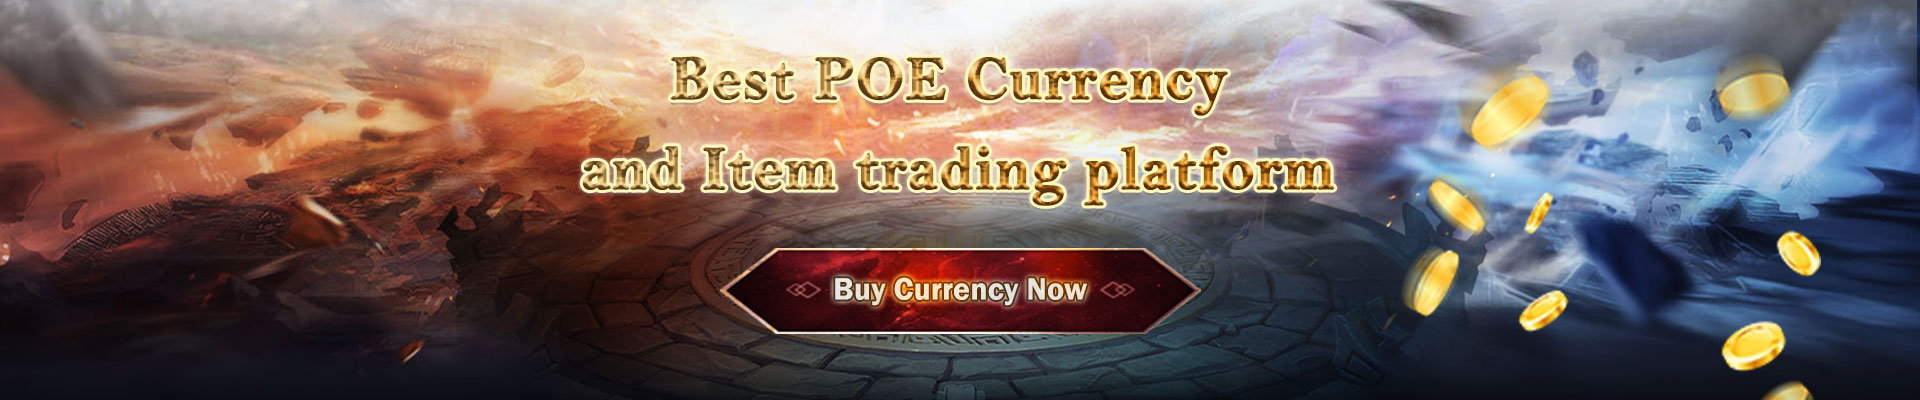 Best POE Currency and Item trading platform